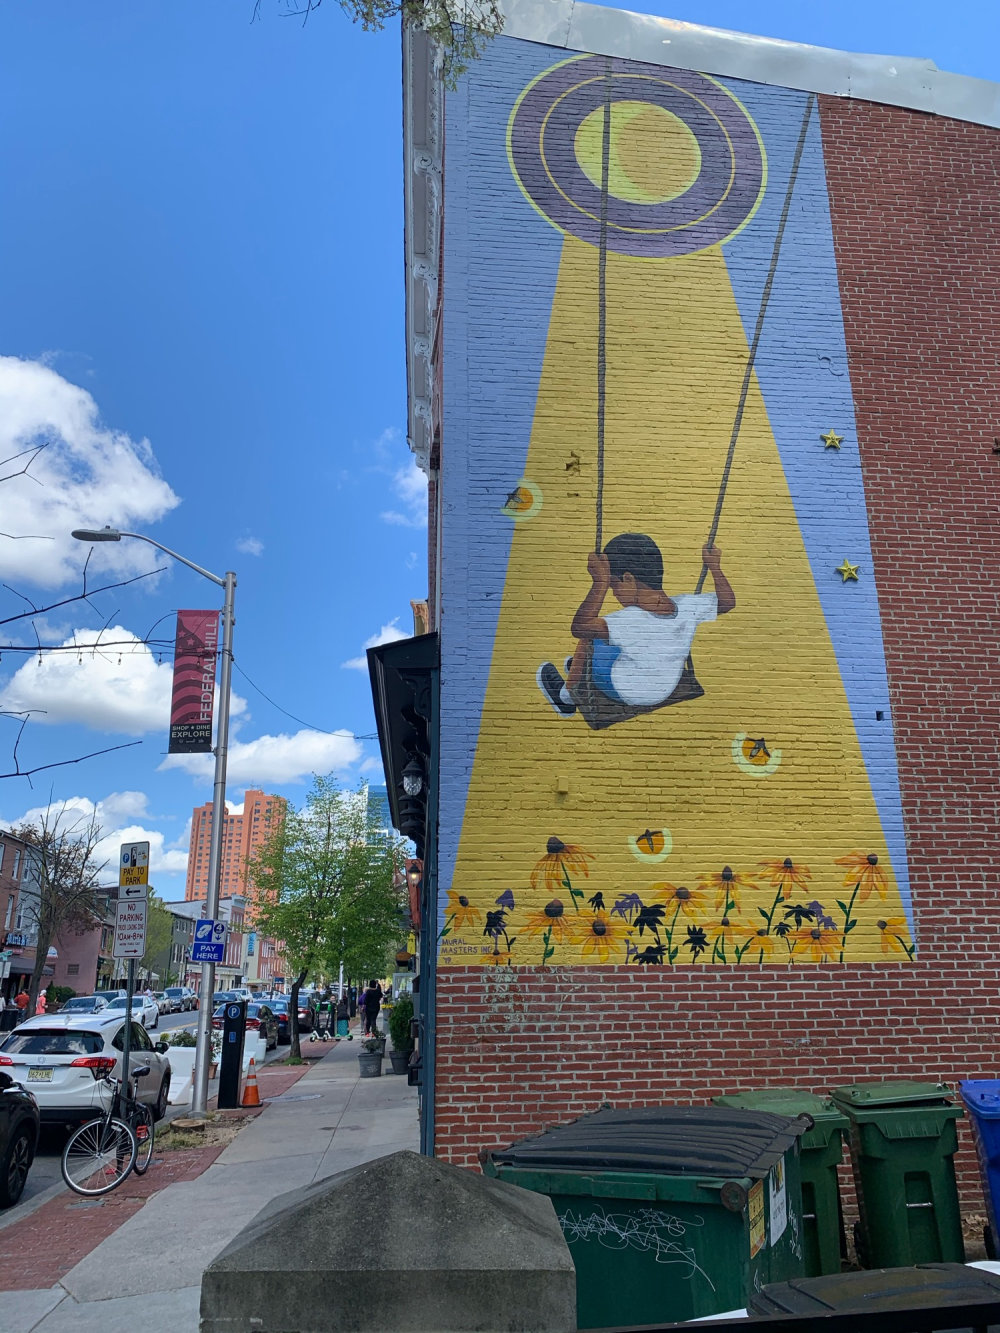 mural in Baltimore by artist unknown.